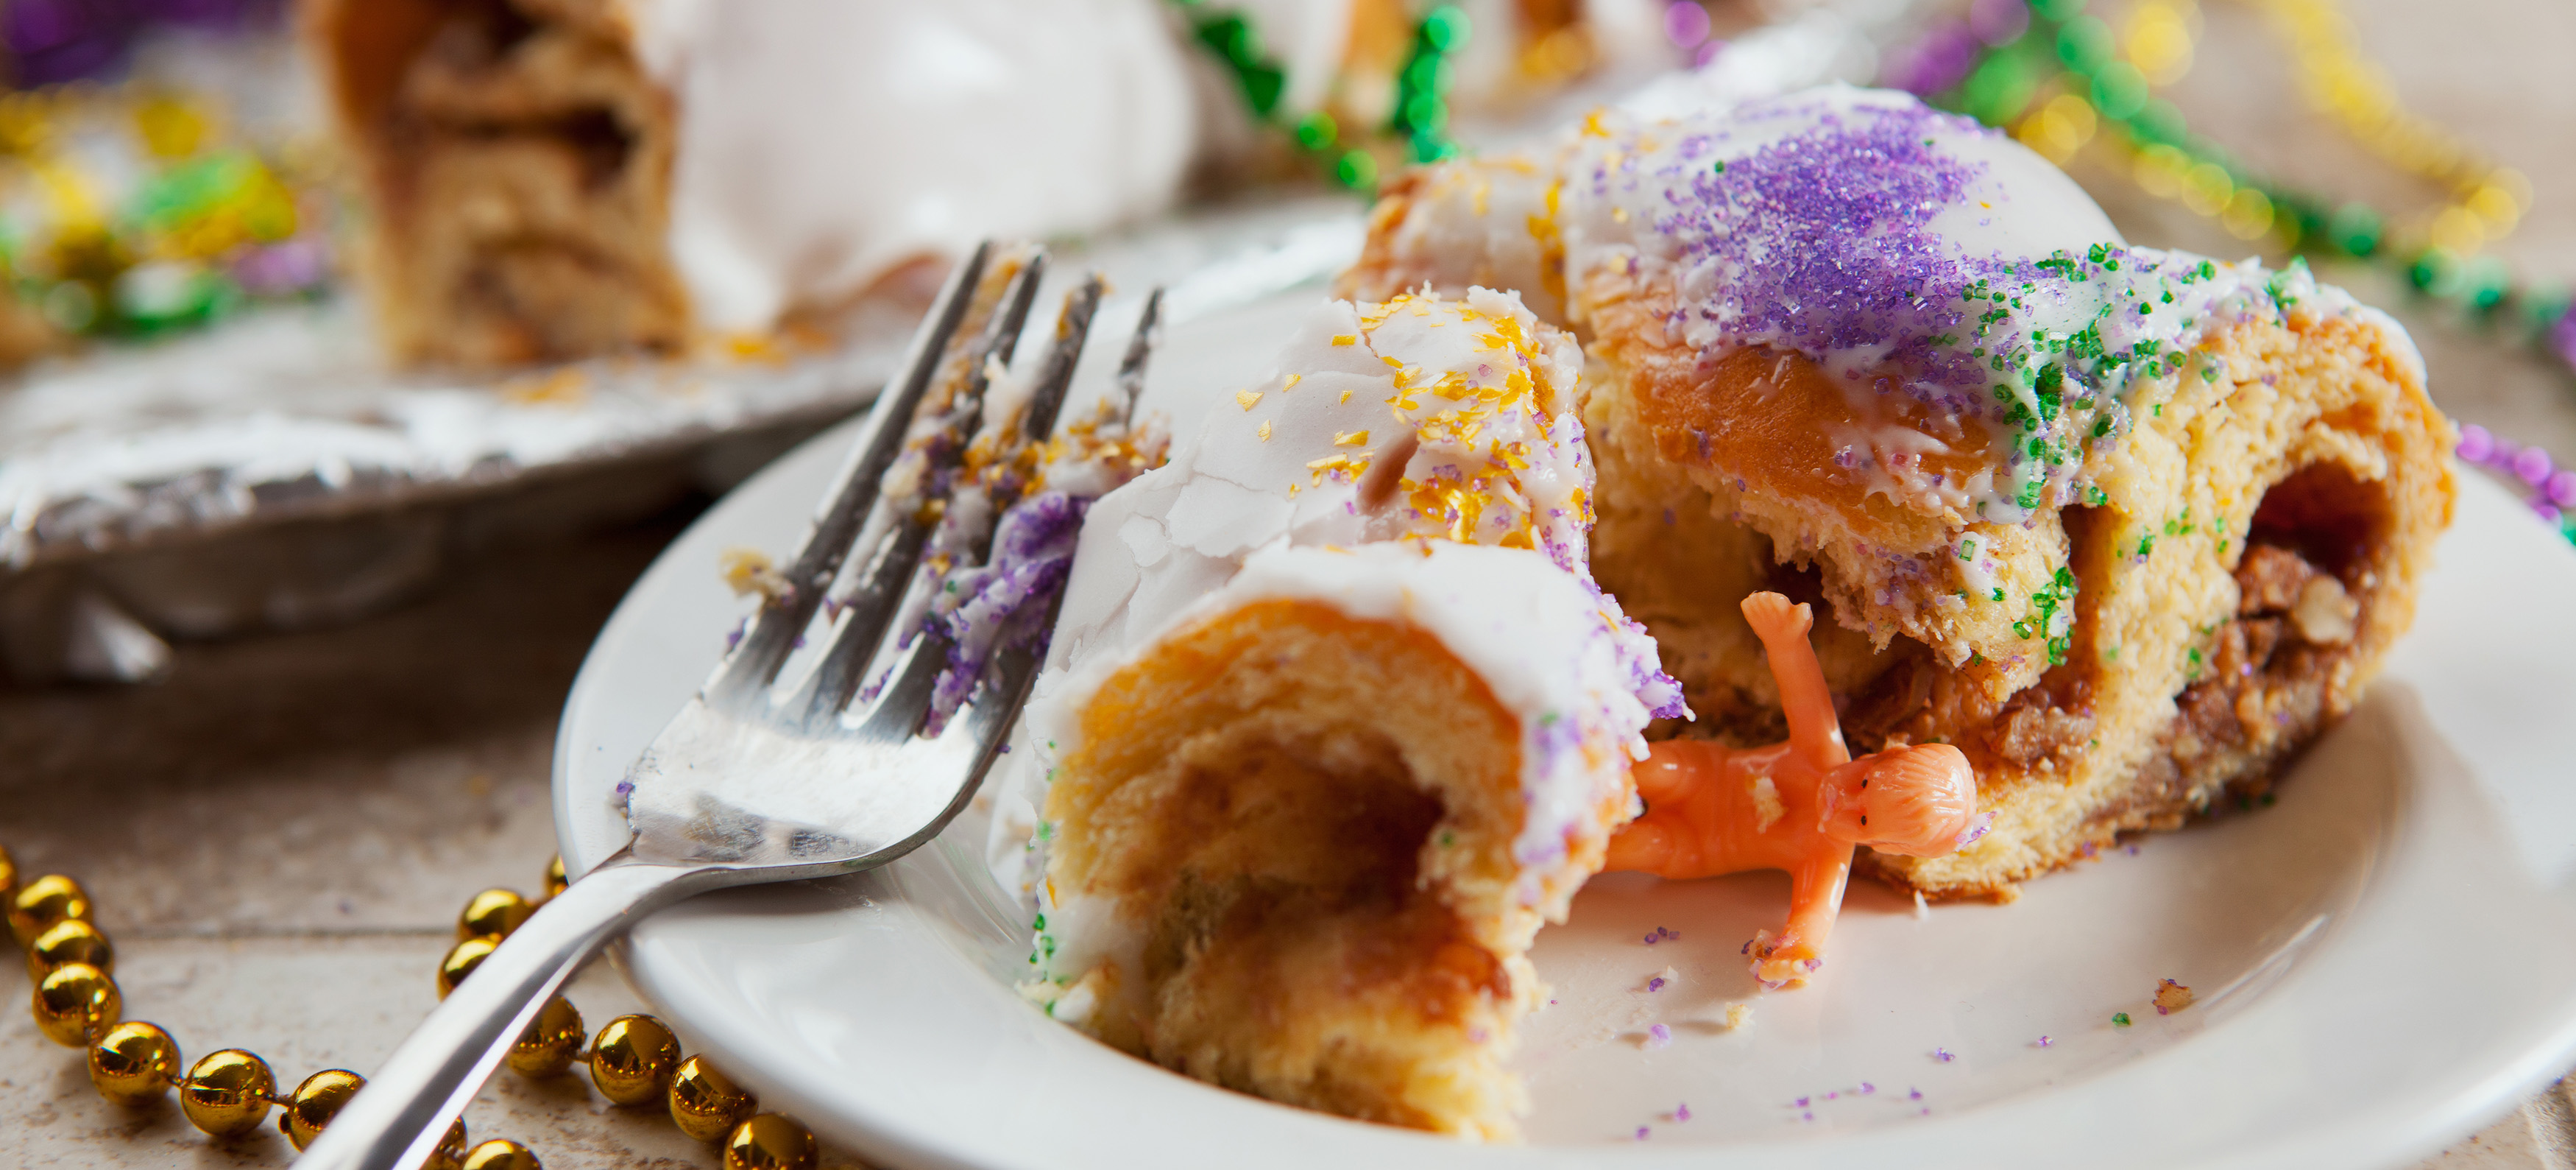 King of Cake Challenge: Final four king cake bakeries face off